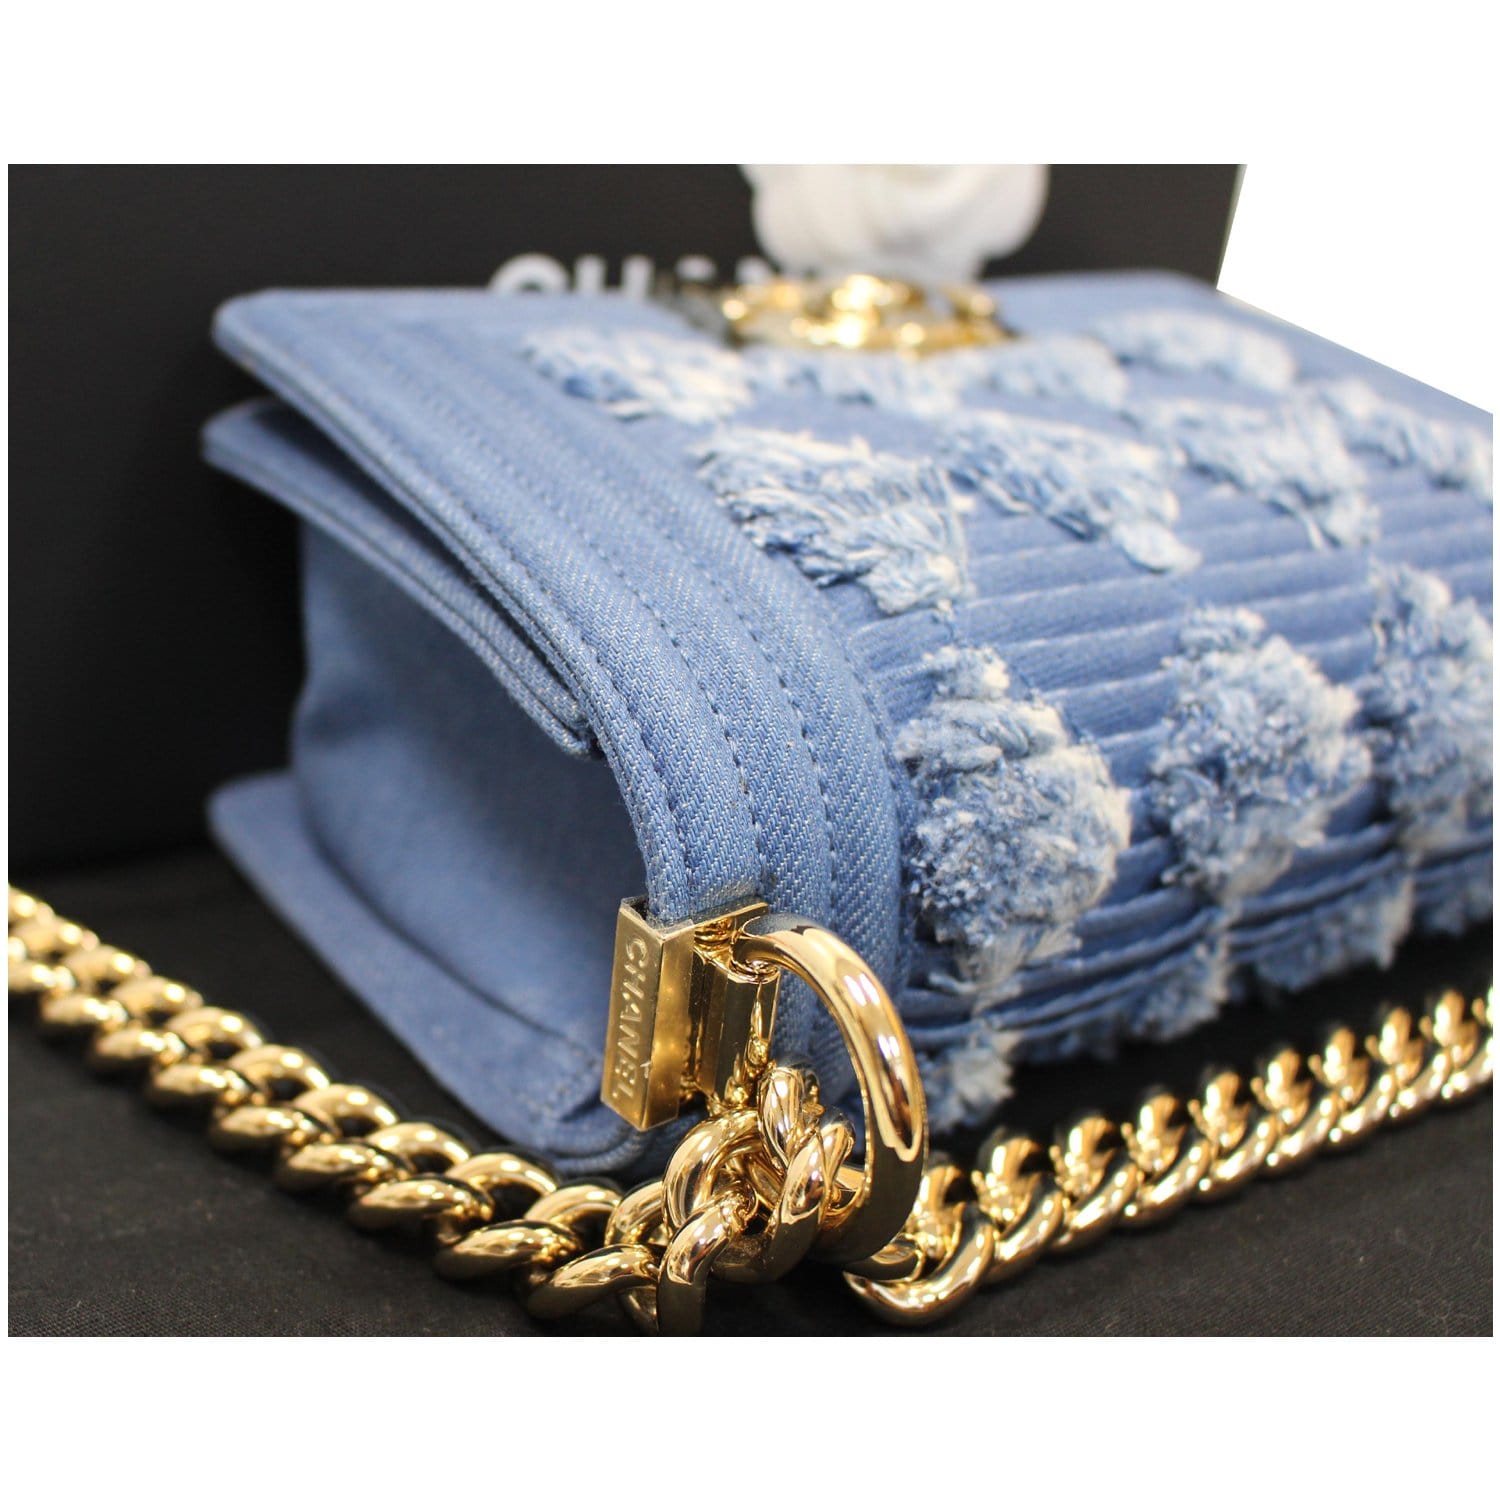 Juicy Couture Bag Charm Waist Bags & Fanny Packs for Women